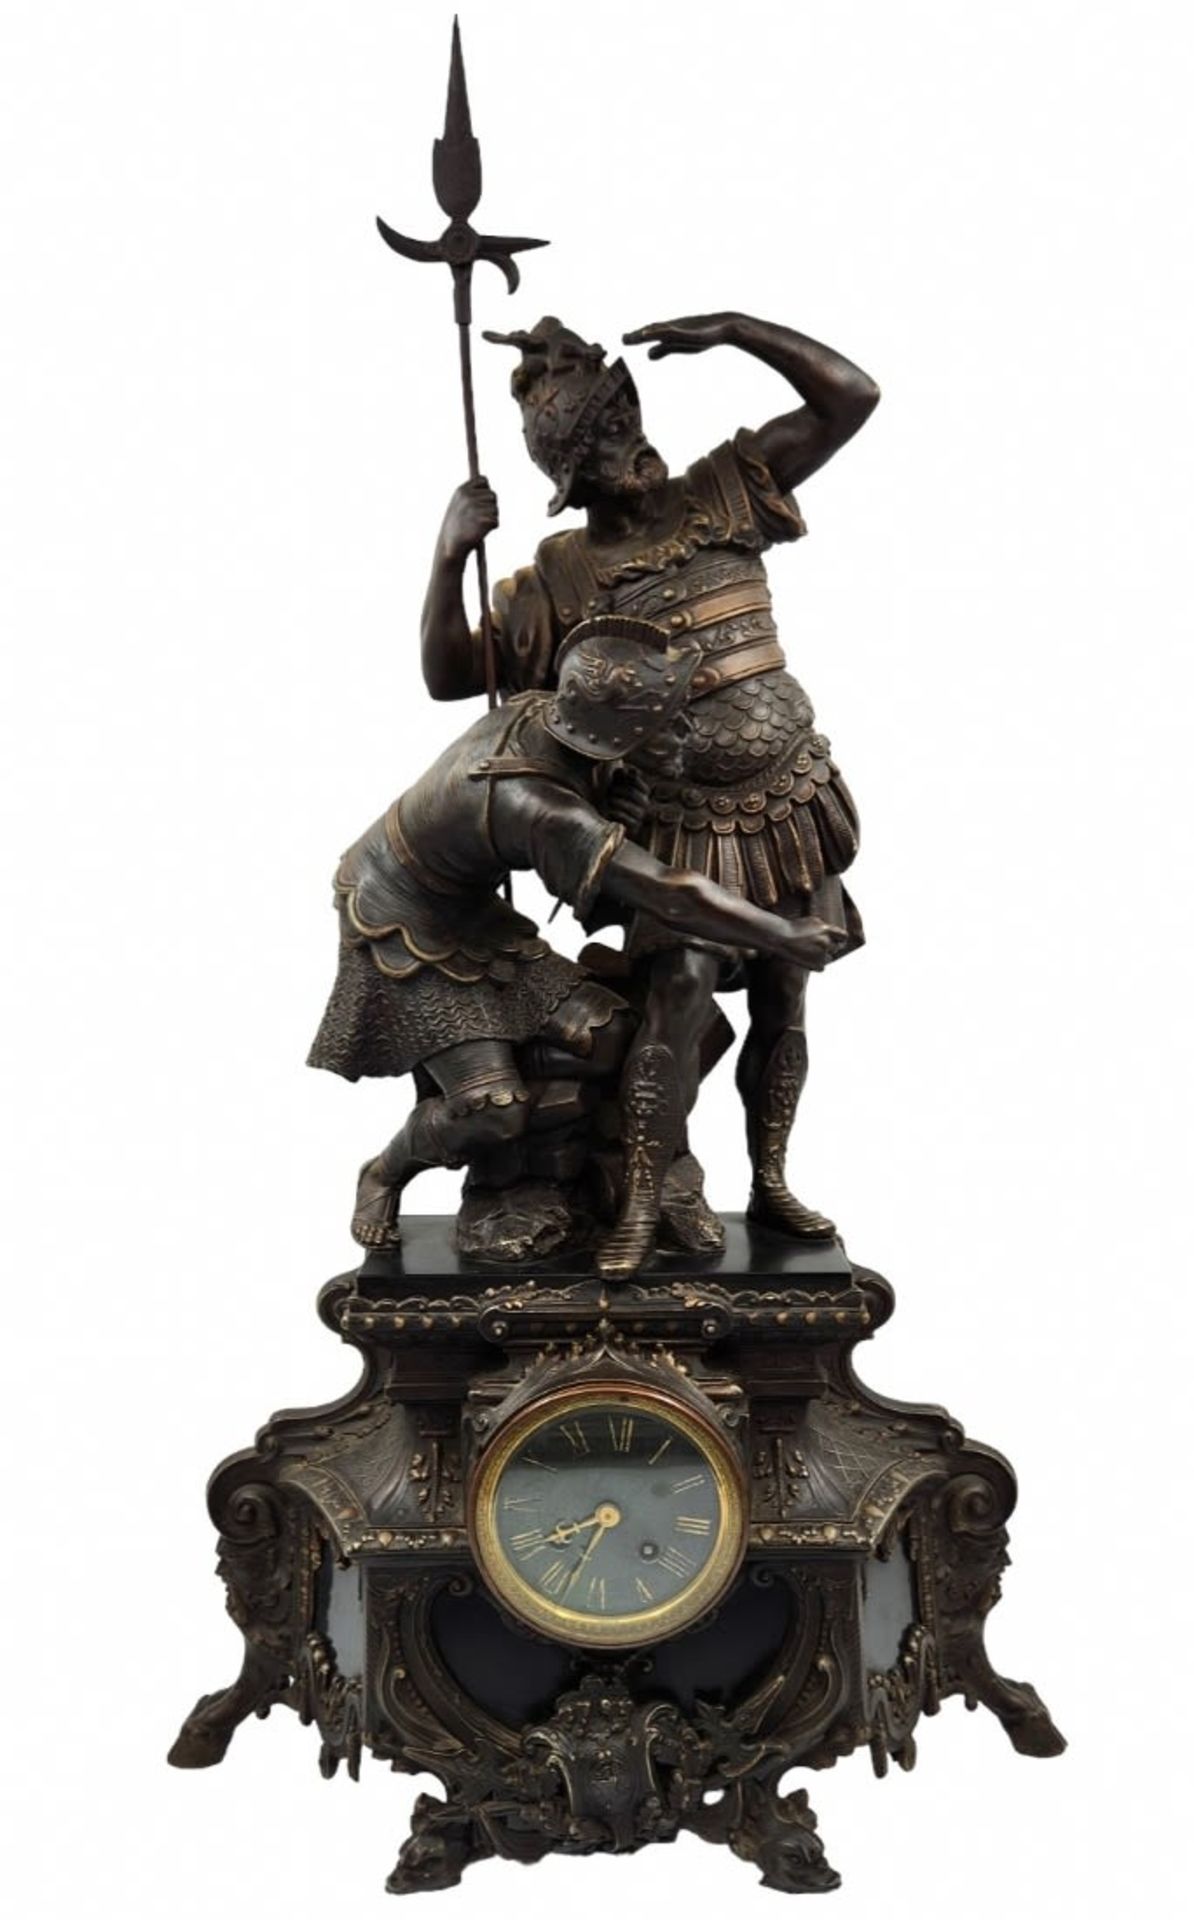 Large antique French mantel clock, magnificent and particularly impressive, made of Spelter, the